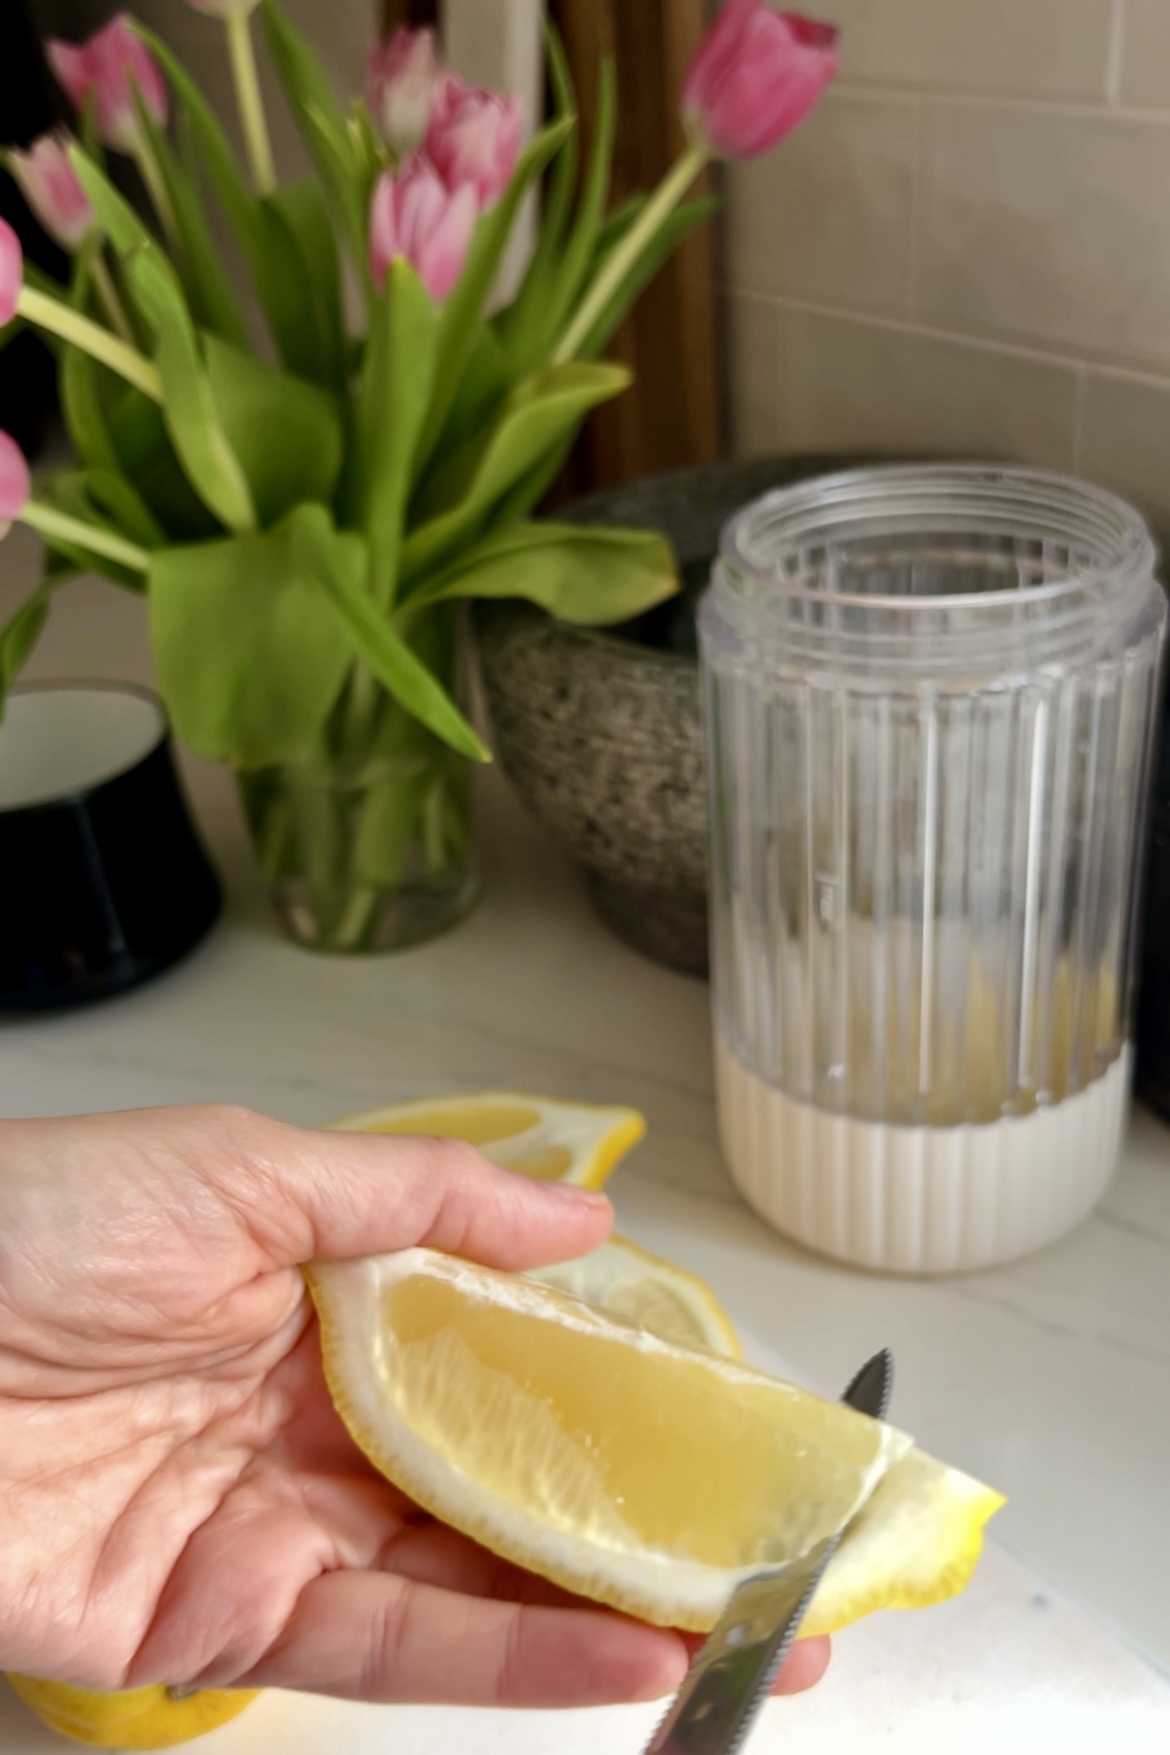 Cutting the pulp of a lemon.